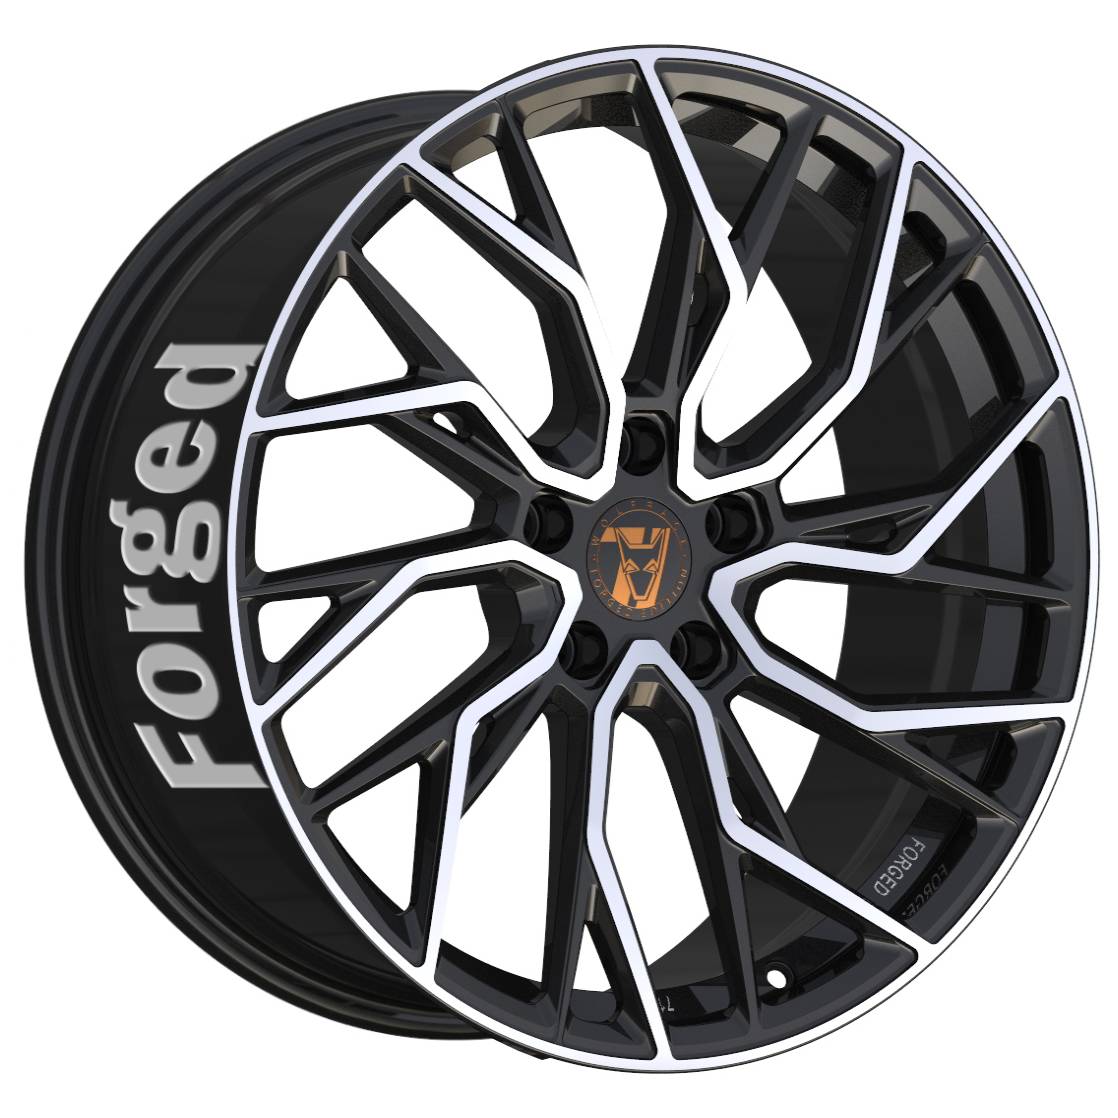 Demon Wheels 71 Forged Edition Voodoo Forged [11x23] -5x115- ET 40